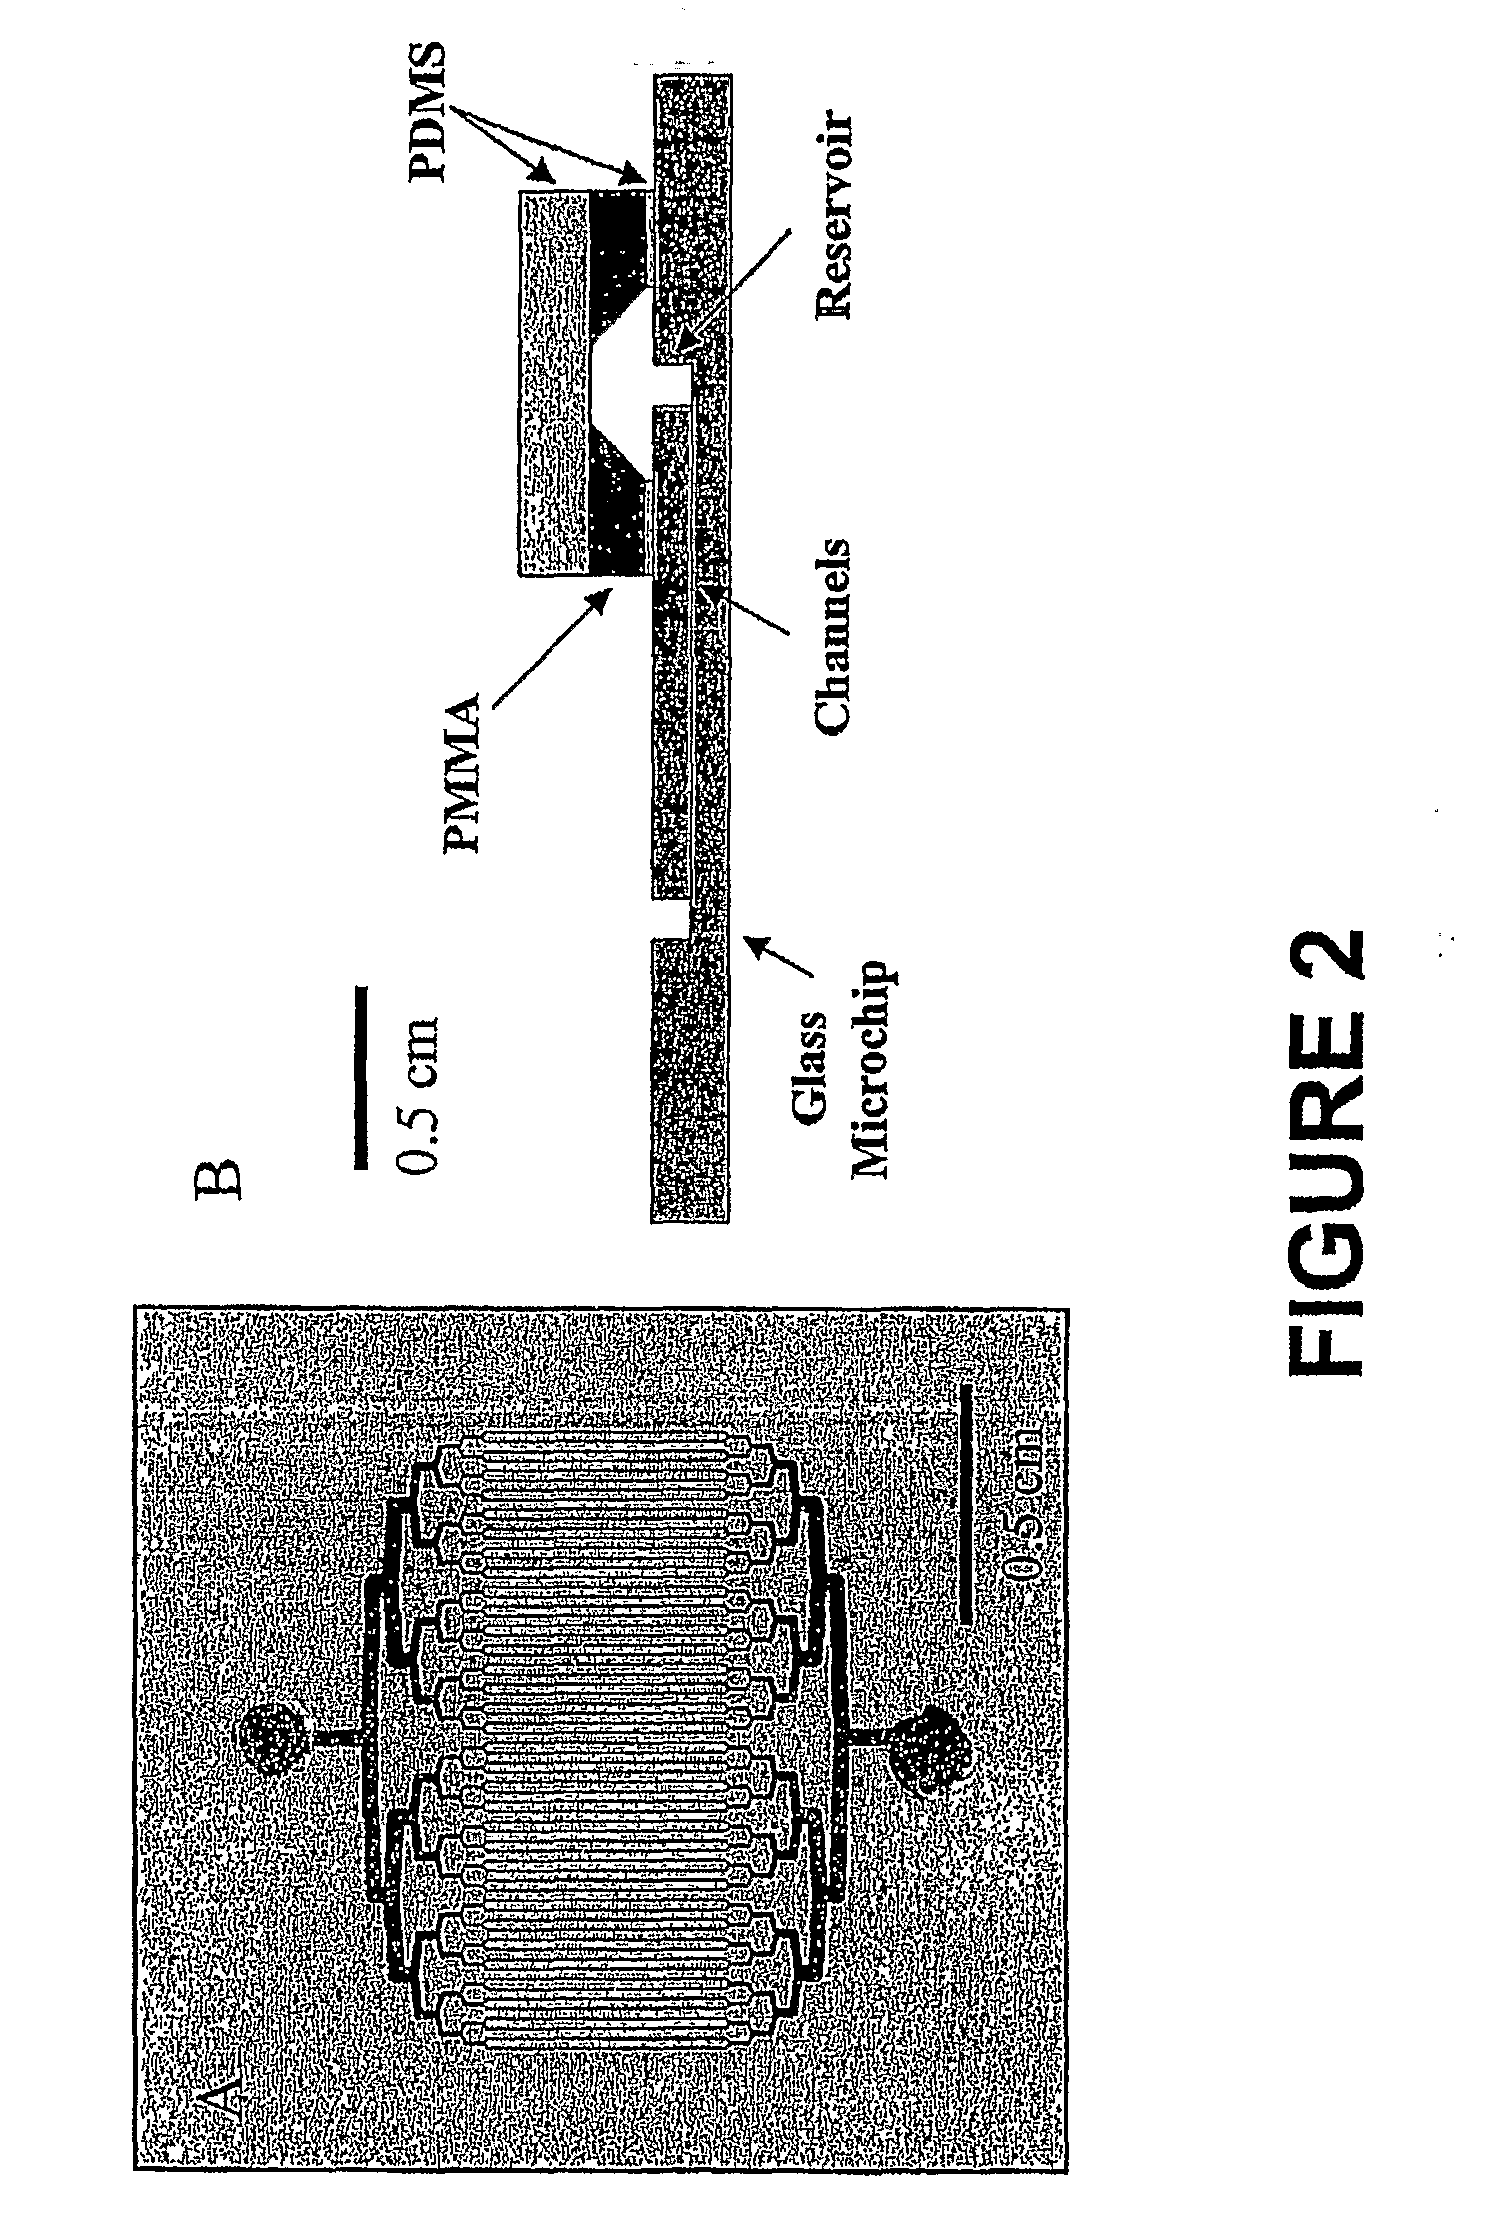 Nucleic acid isolation methods and materials and devices thereof